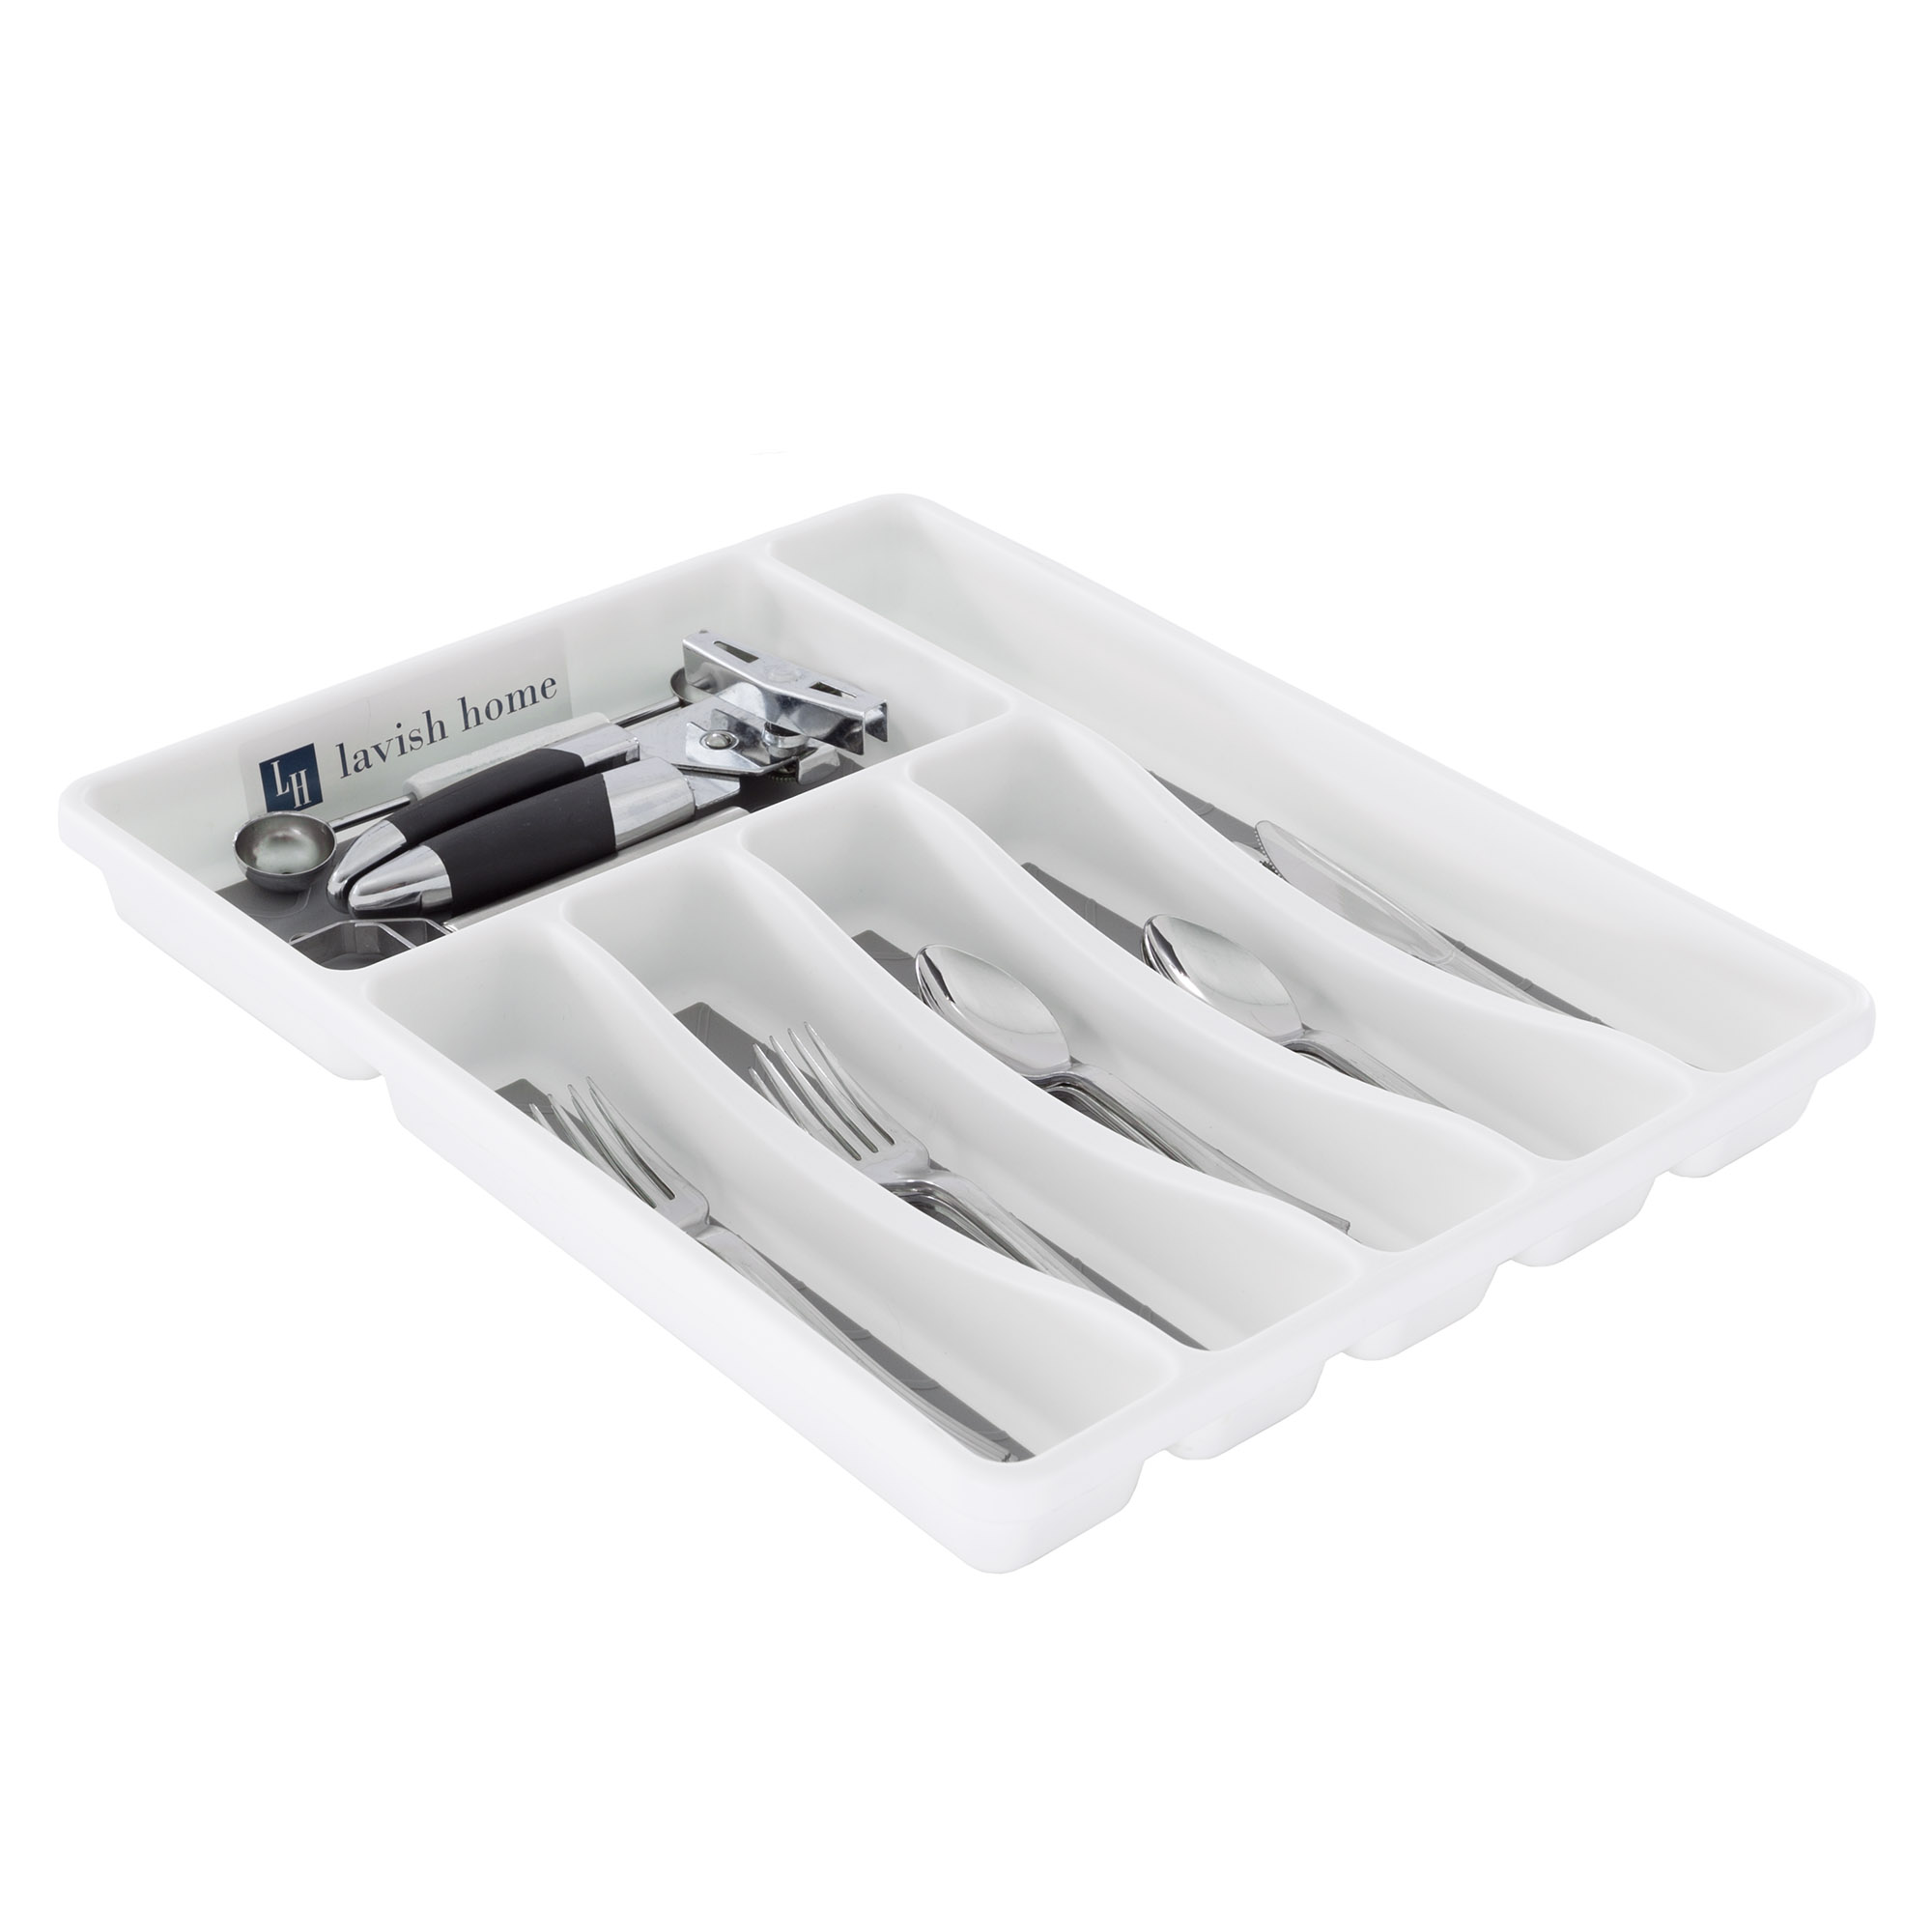 Lavish Home Silverware Drawer Organizer with 6 Sections and Nonslip Tray - image 2 of 4